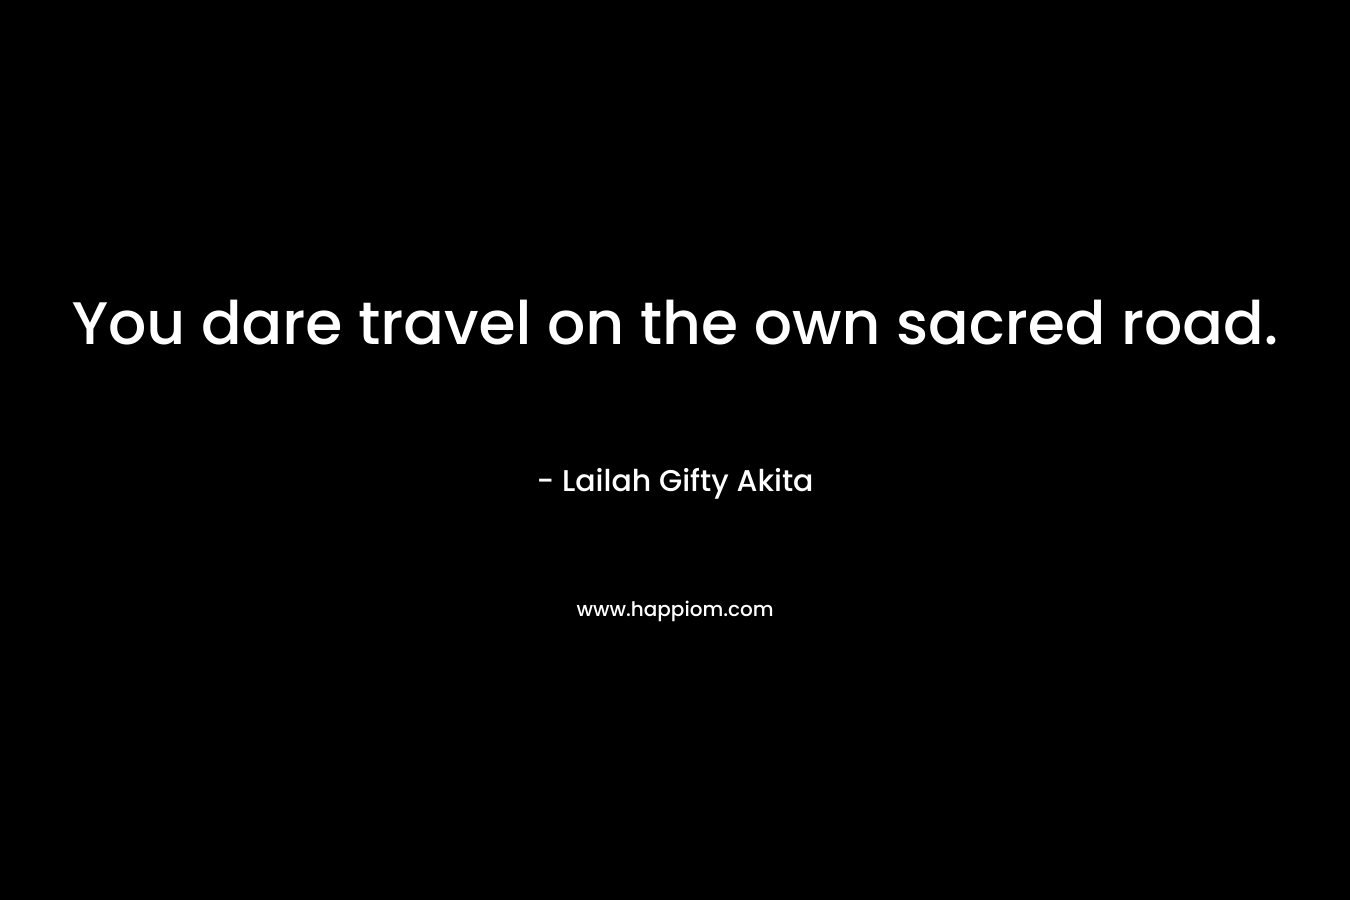 You dare travel on the own sacred road.